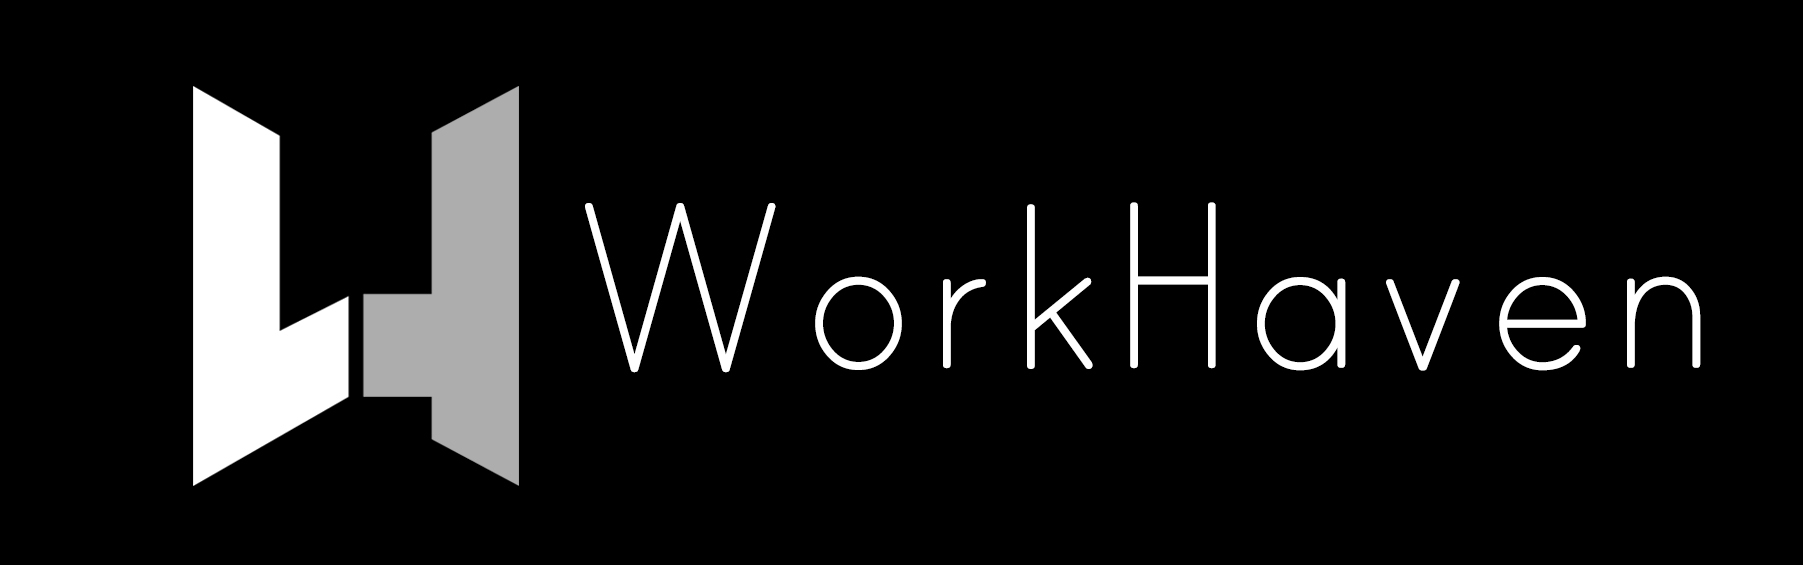 WorkHaven Space, Inc.